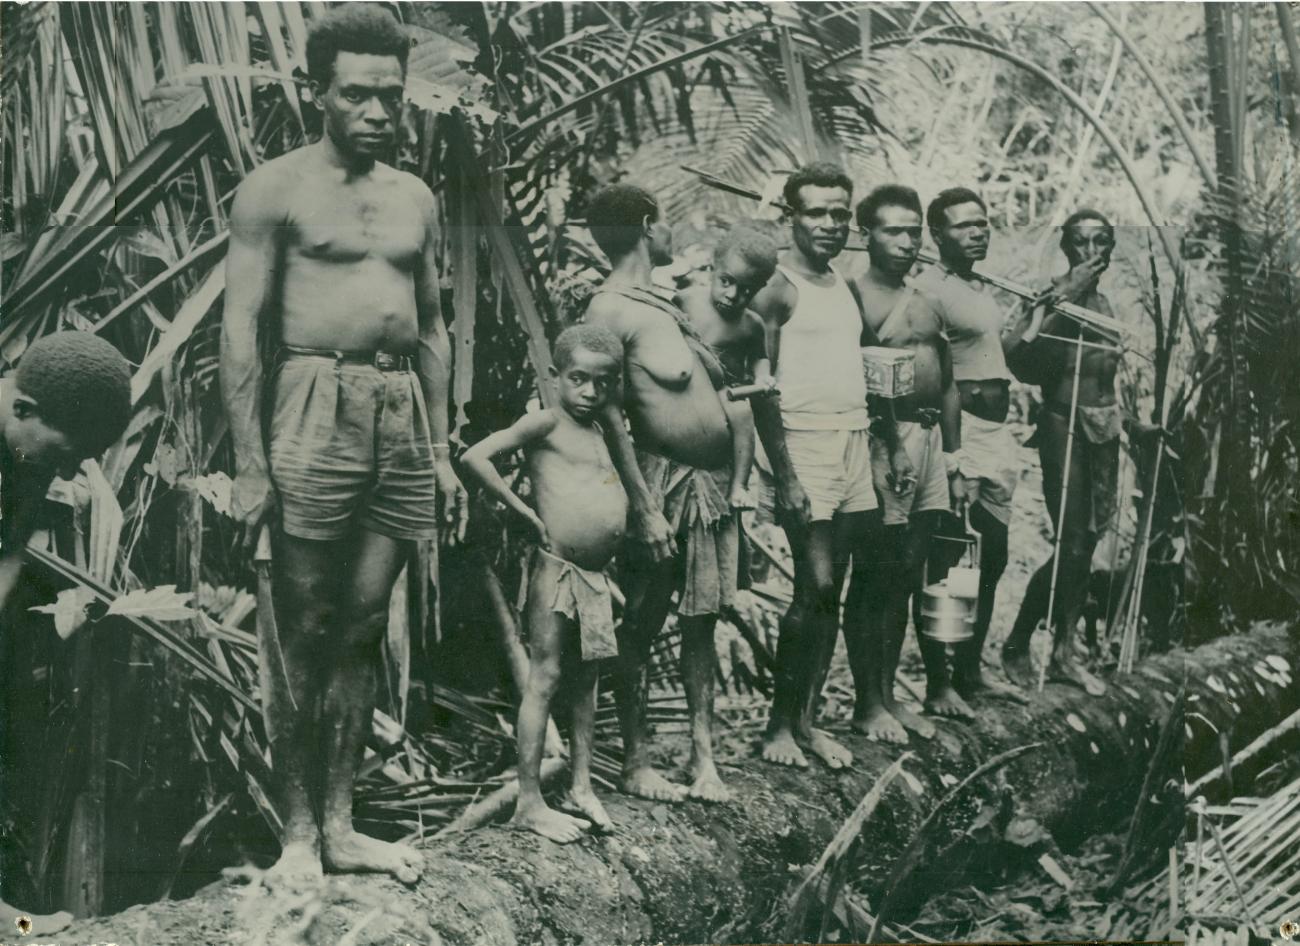 BD/40/95 - 
Papua people of different age standing in line
